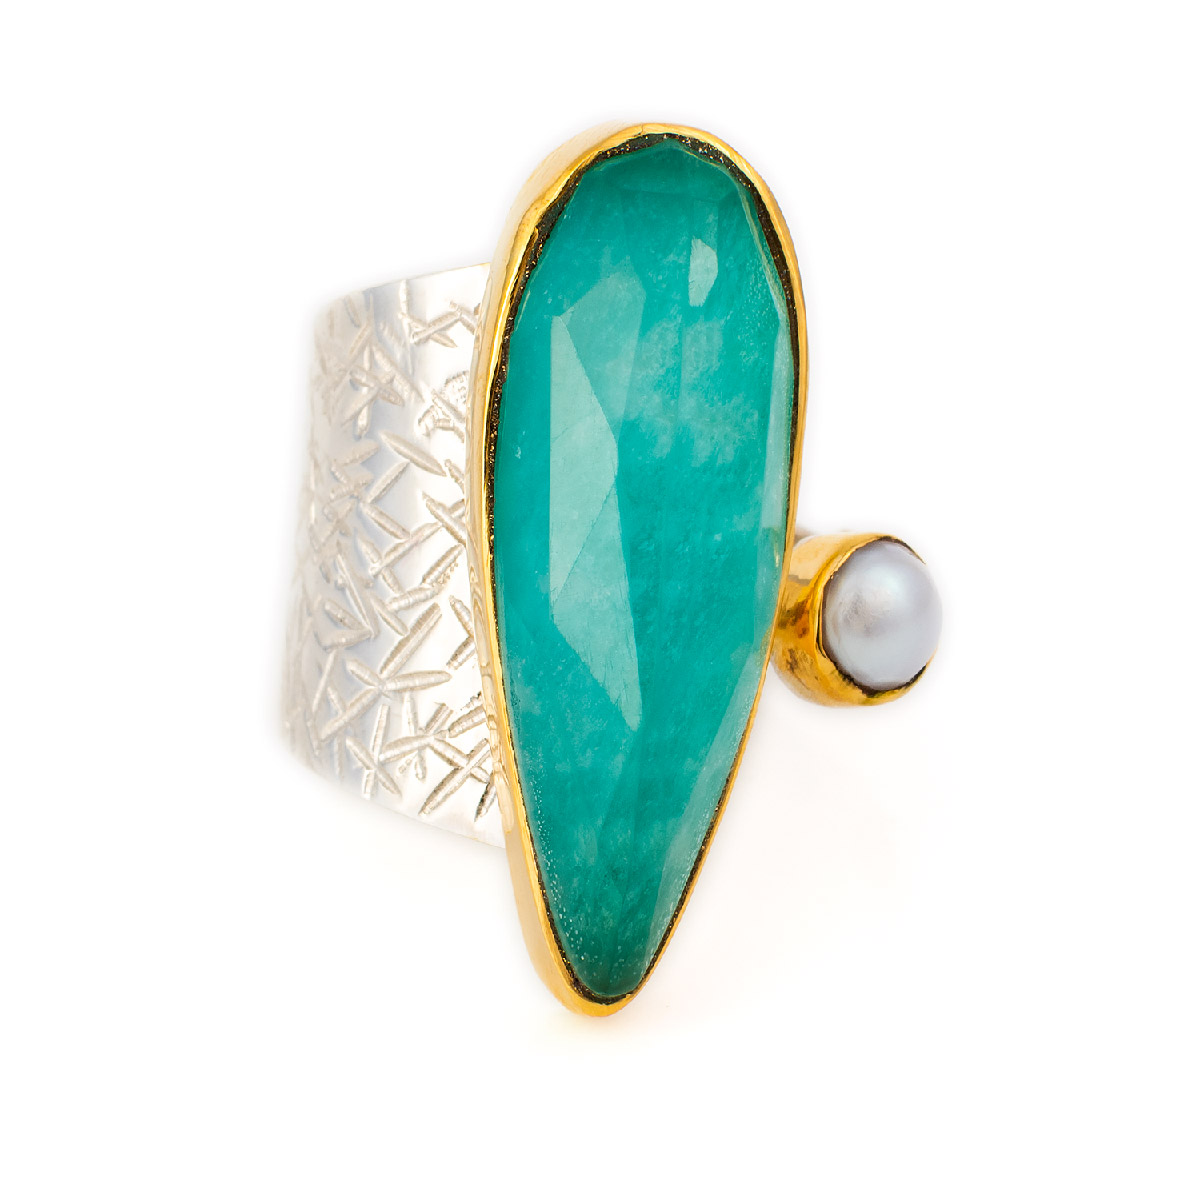 Amazonite Doublet Ring with Pearl - 18K Gold and Sterling Silver